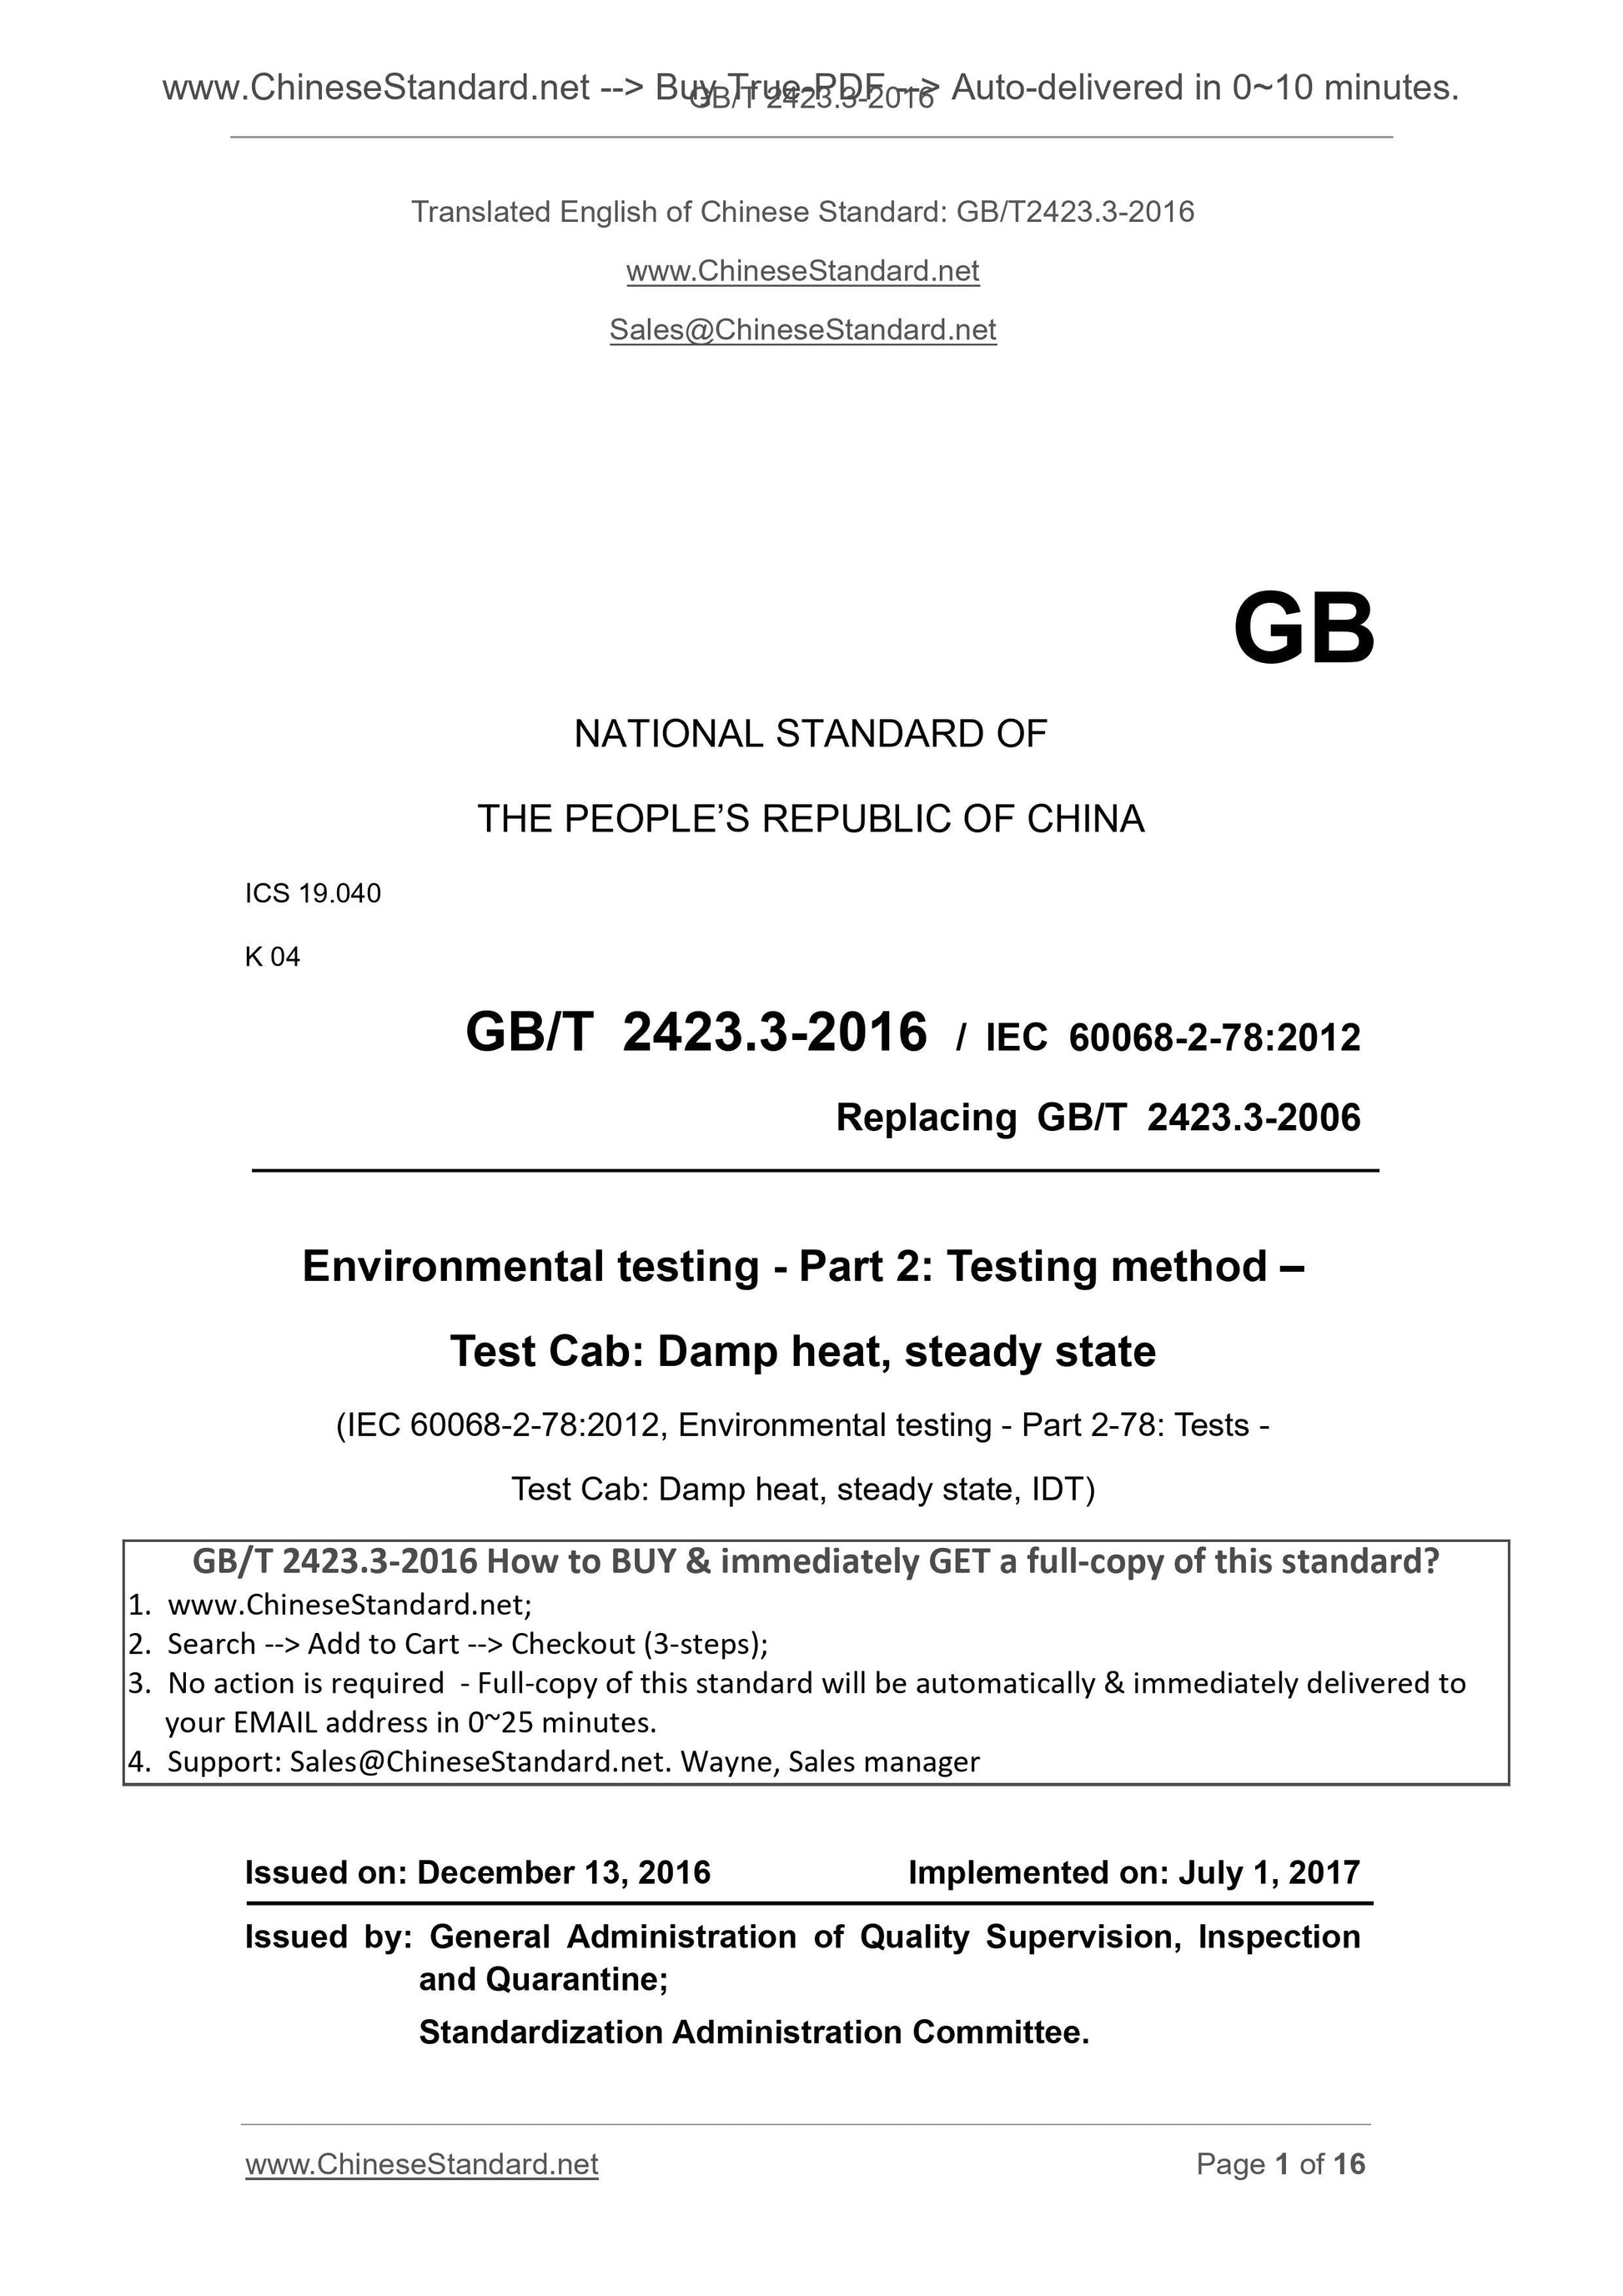 GB/T 2423.3-2016 Page 1